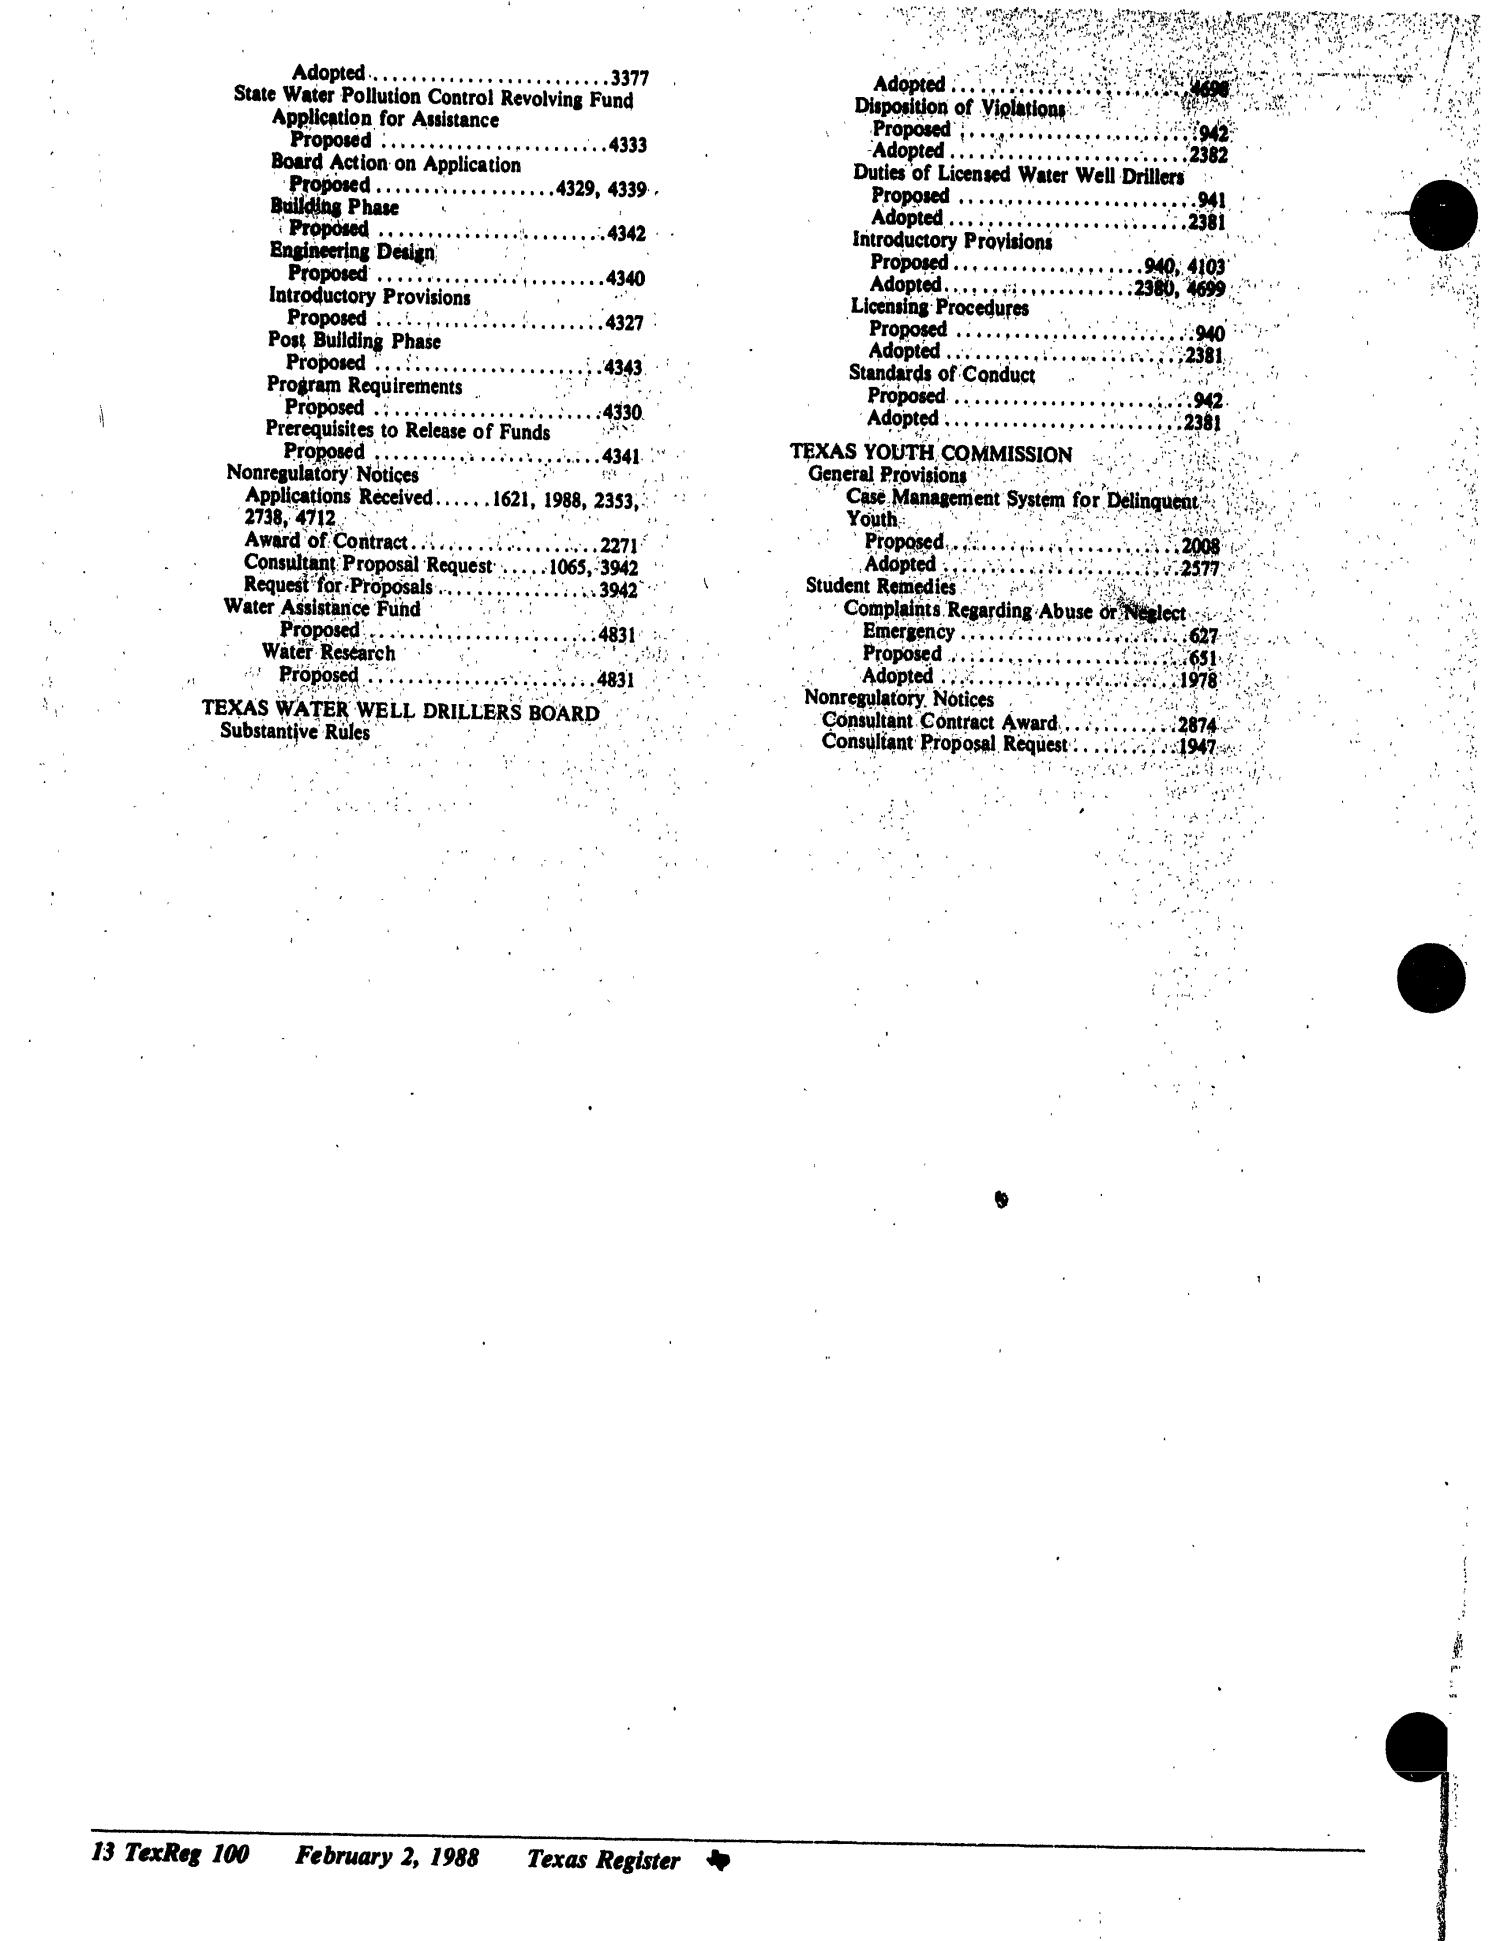 Texas Register: Annual Index January - December 1988, Volume 13 Numbers [1-96] - pages 225-350, February 3, 1989
                                                
                                                    100
                                                